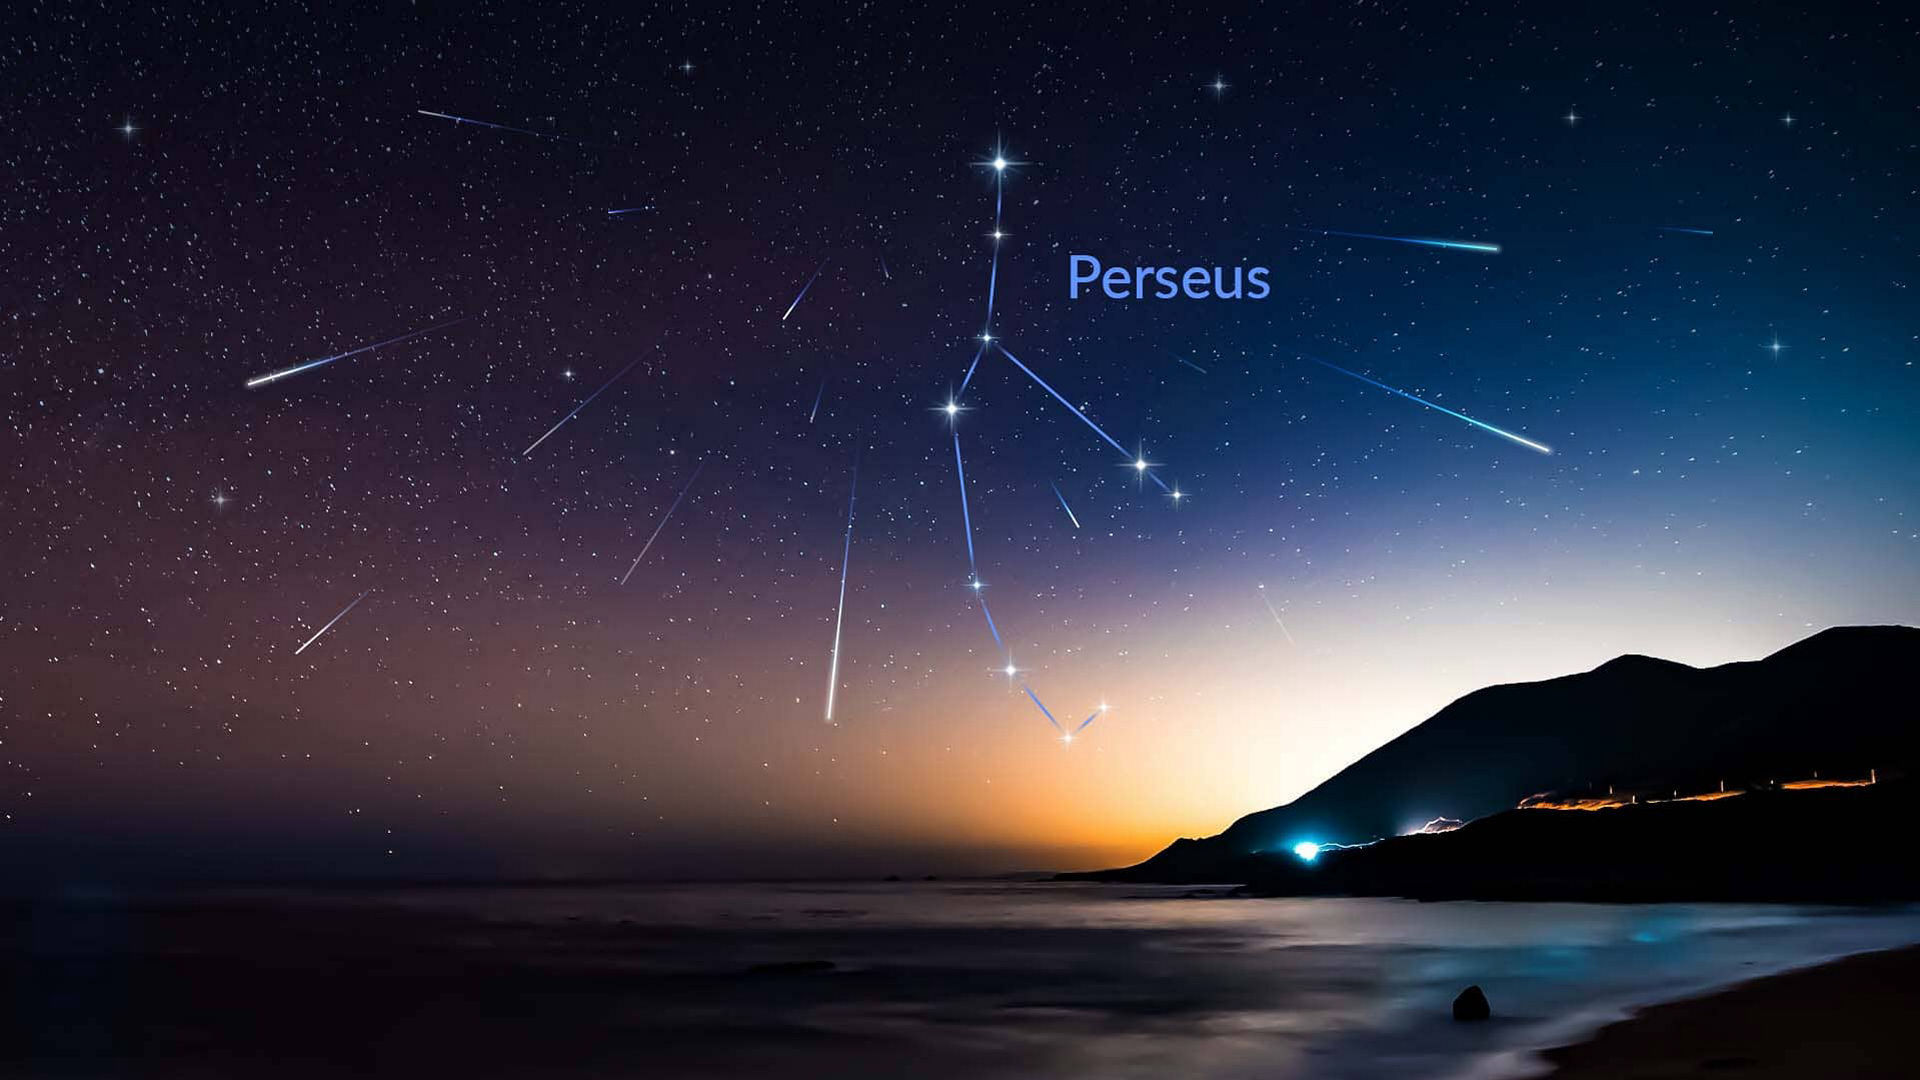 How to watch and photograph the Perseid meteor shower in 2021 TechRadar